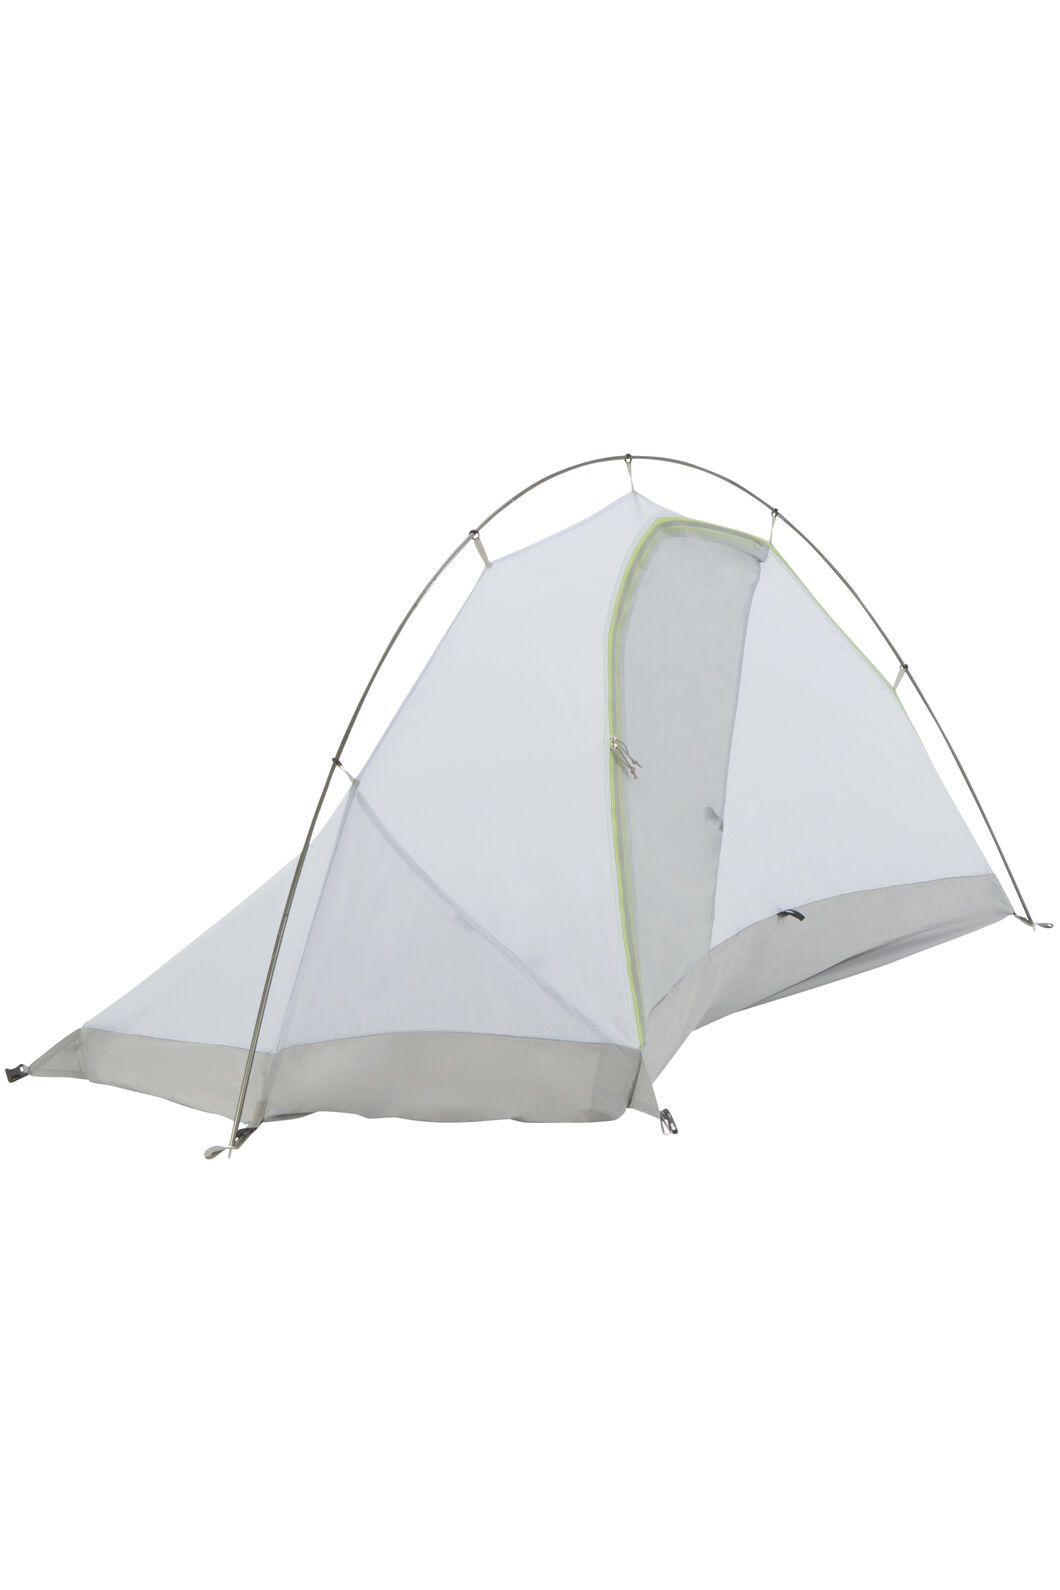 ophouden lus morfine Macpac Microlight Hiking Tent — One Person | Macpac